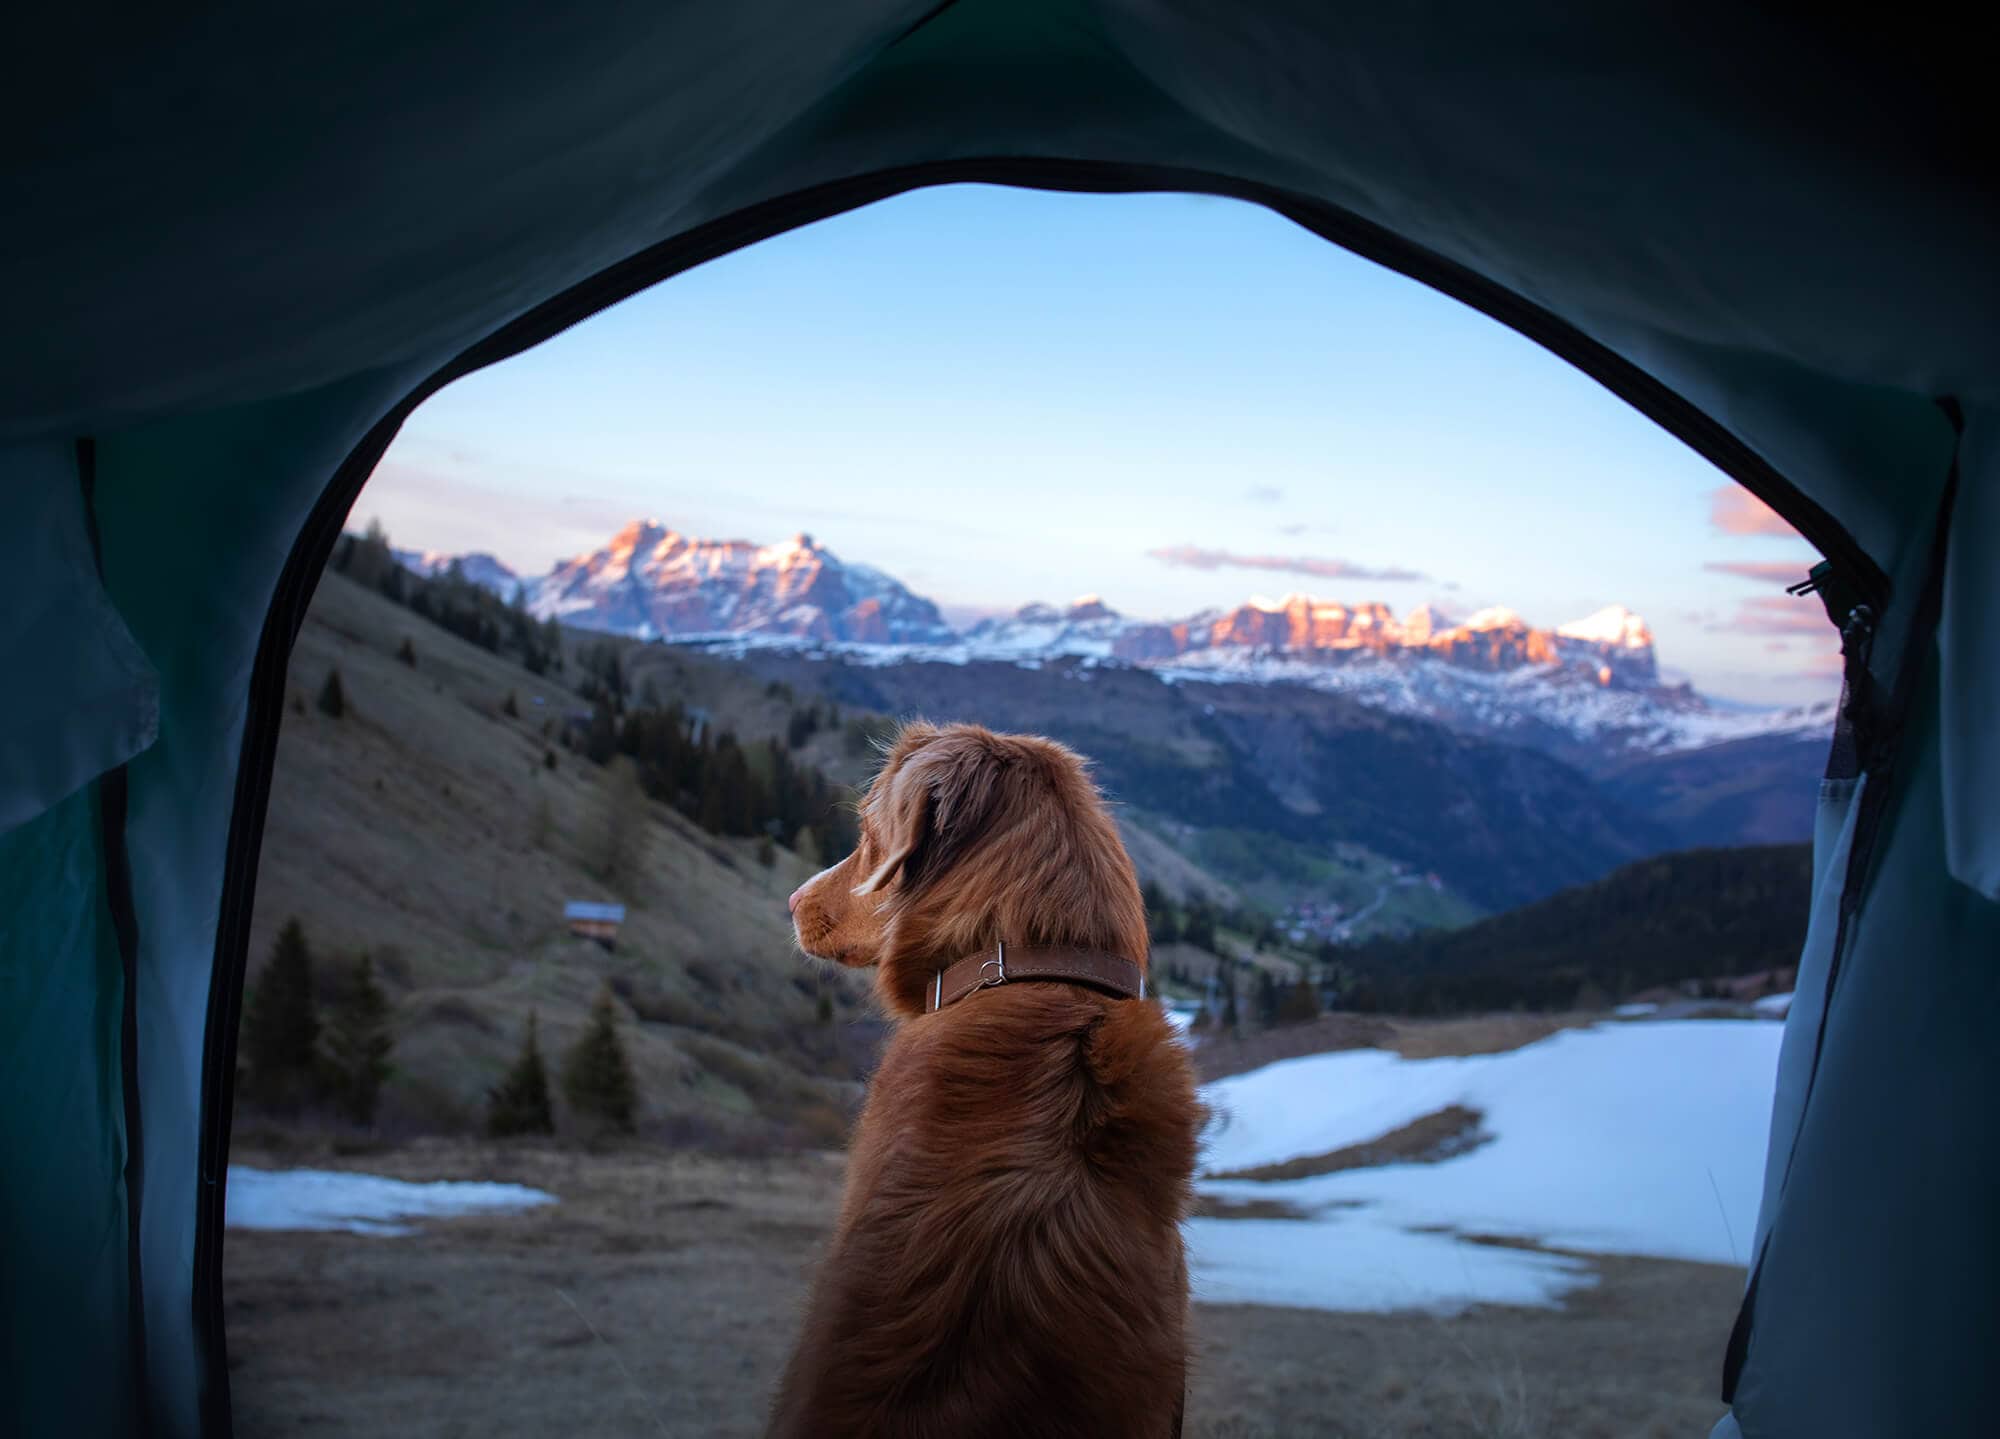 Cold camping with dog in a beautiful snow capped setting